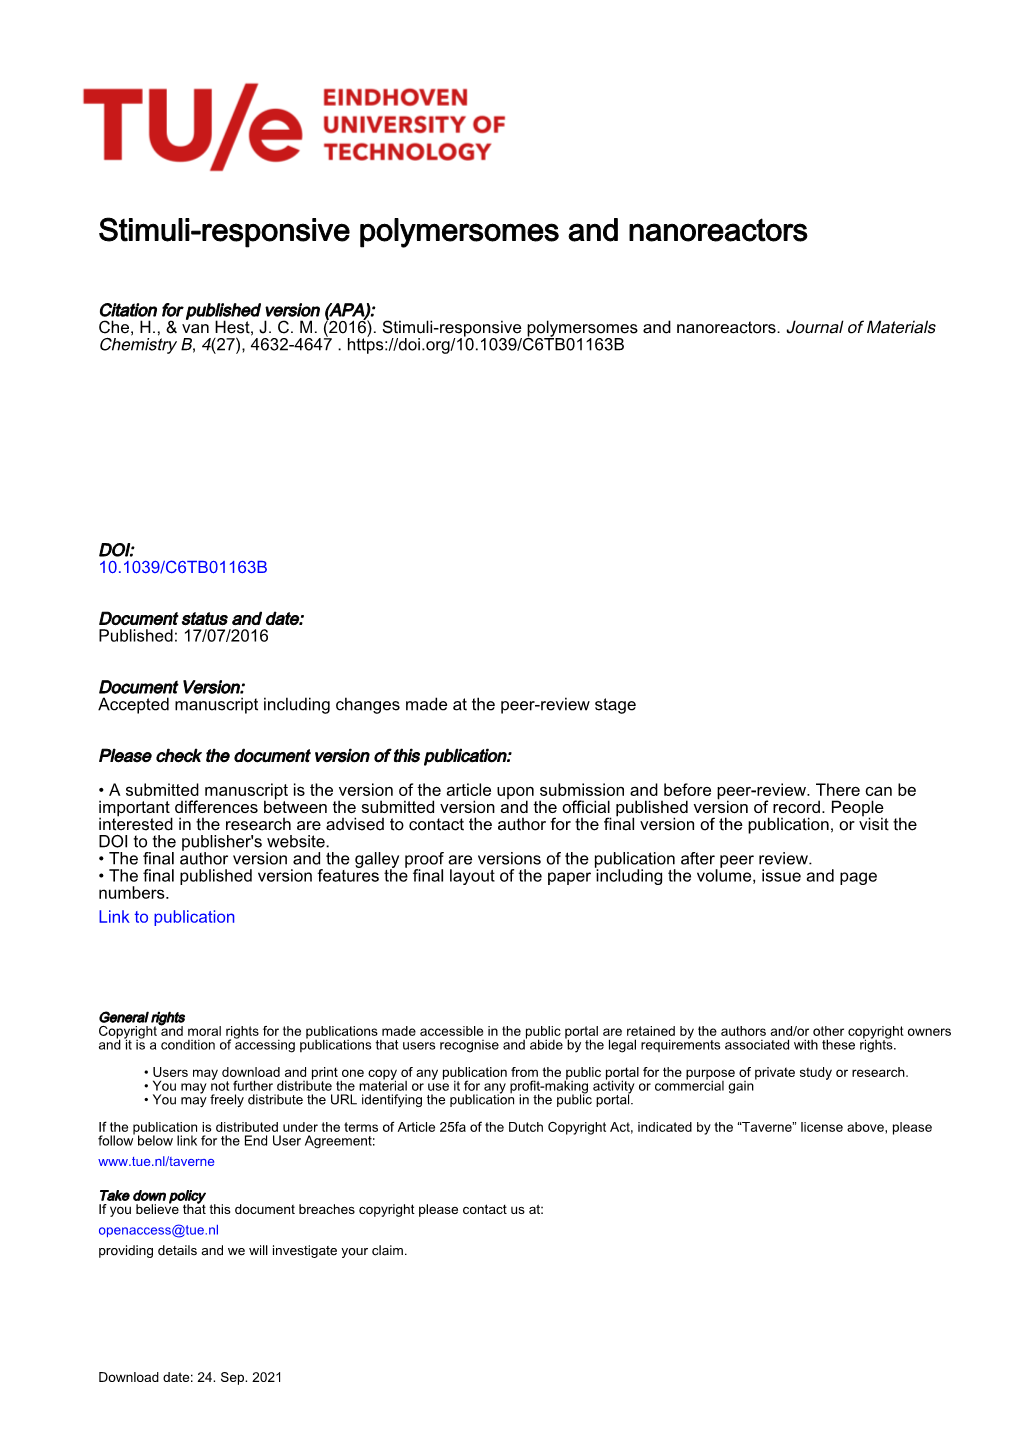 Stimuli-Responsive Polymersomes and Nanoreactors